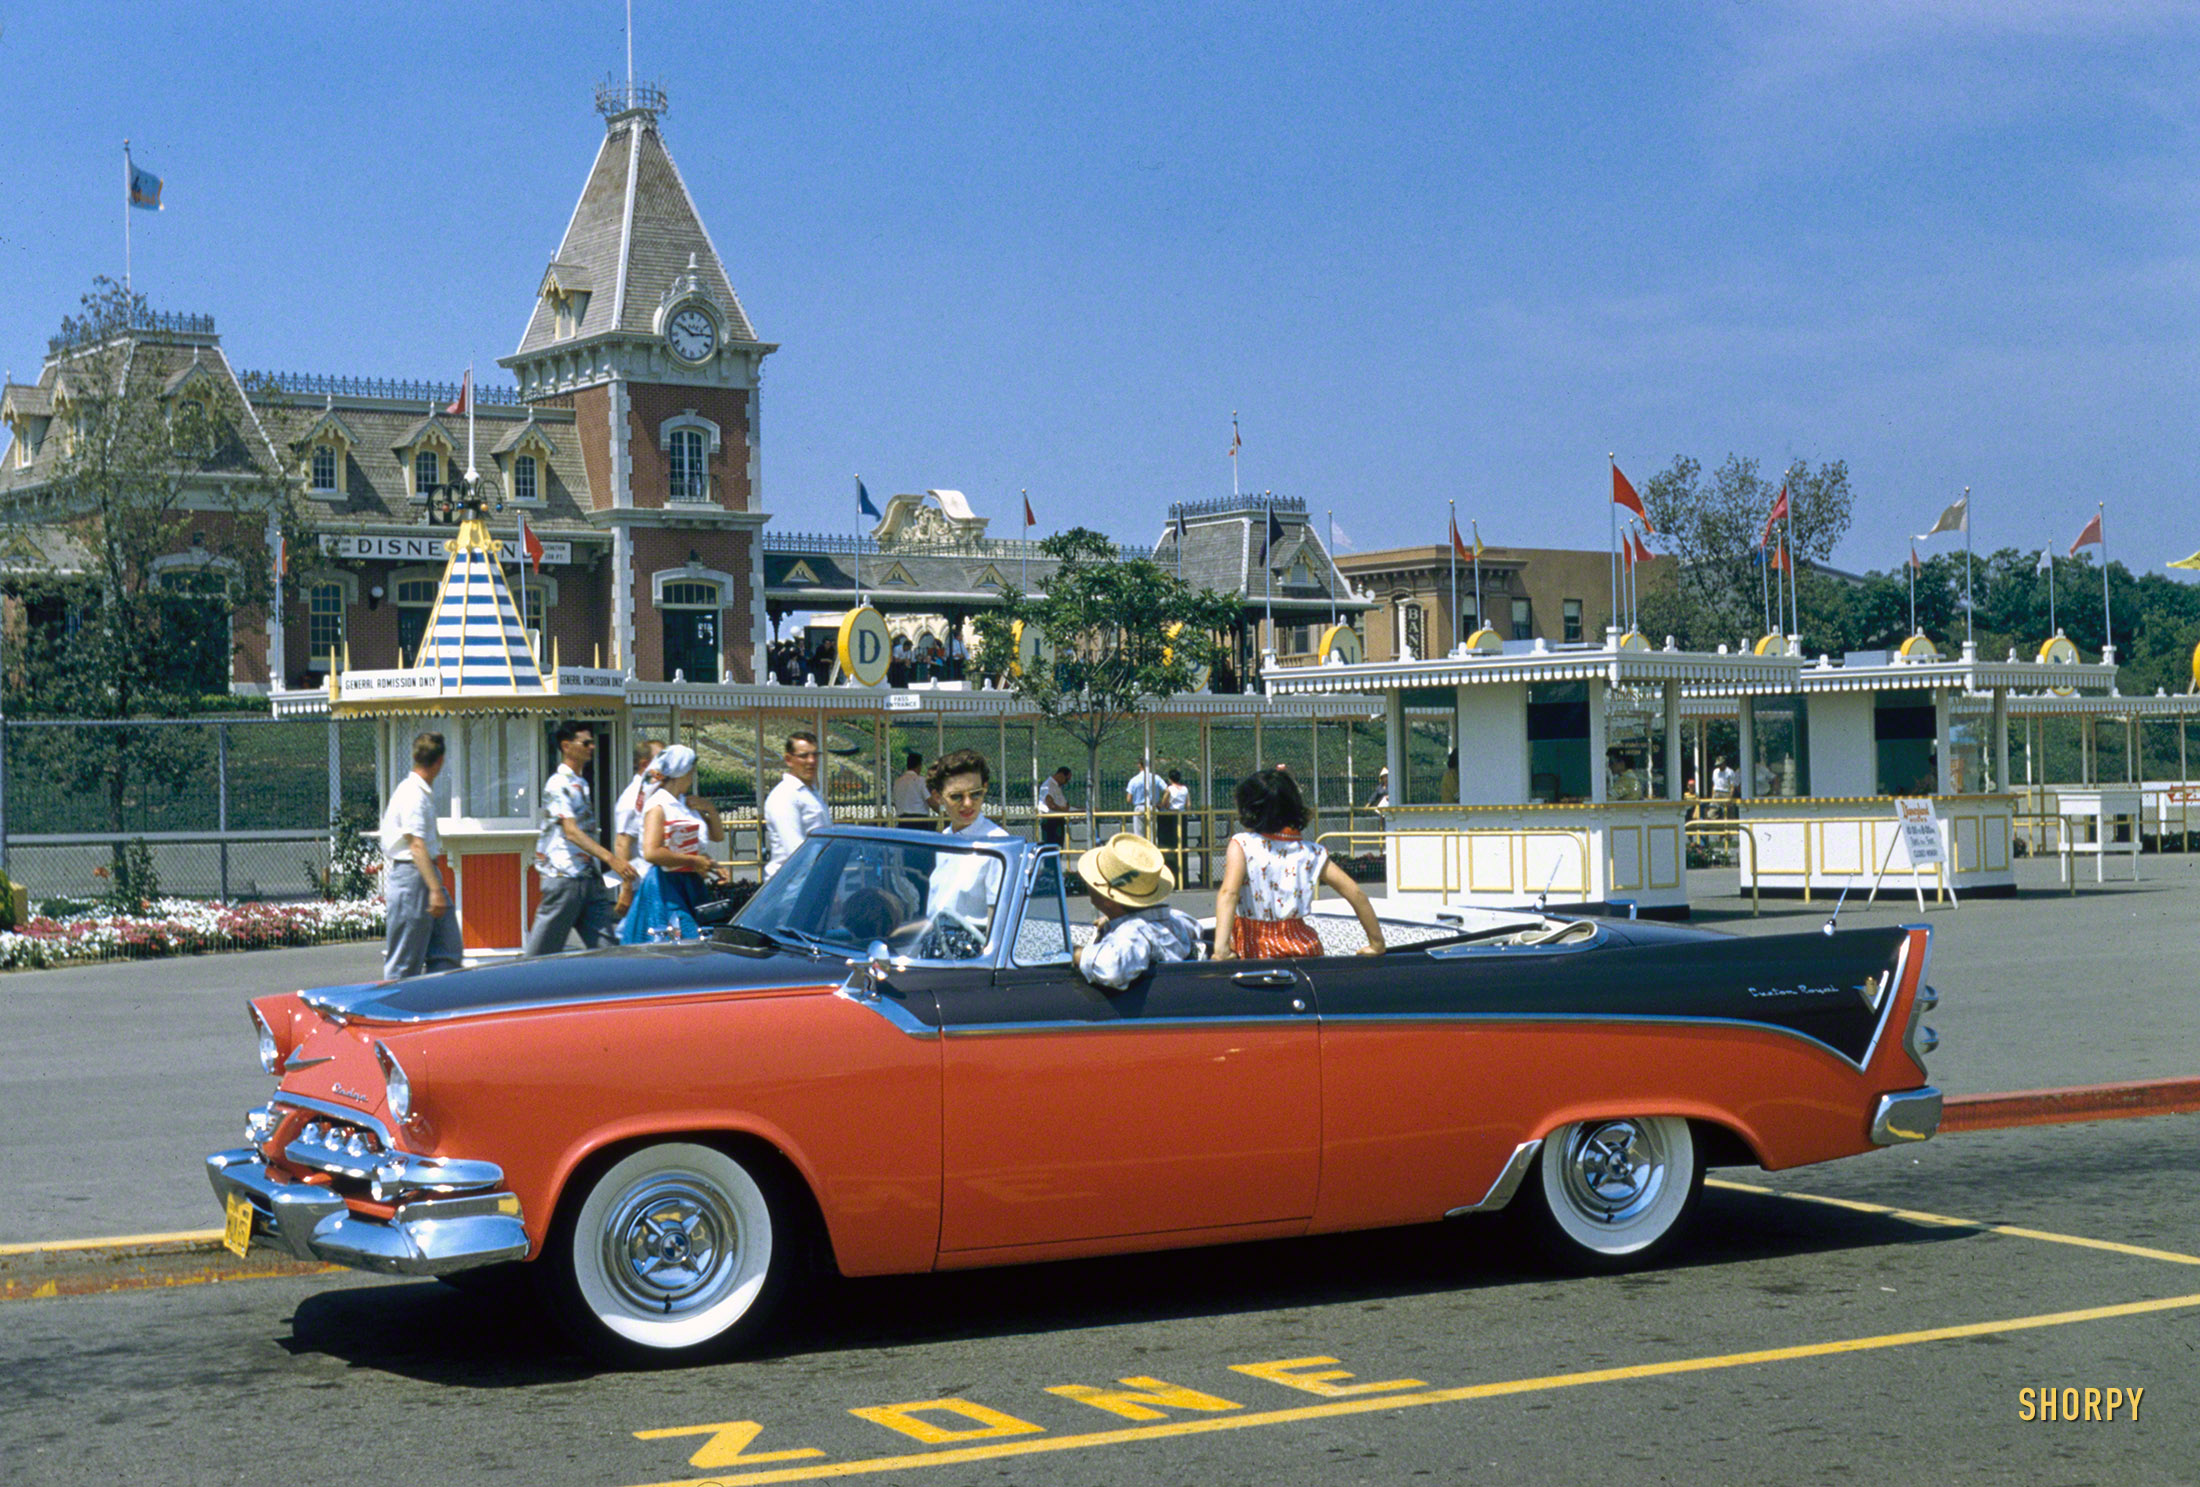 &nbsp; &nbsp; The Dodge Custom Royal convertible last seen here and here.
June 1956. "Aspects of life in Southern California, including cars at drive-in restaurant, drive-in laundromat, drive-up bank, shopping center, visiting Disneyland." Kodachrome by Maurice Terrell for the Look magazine assignment "Los Angeles: The Art of Living Bumper-to-Bumper." View full size.